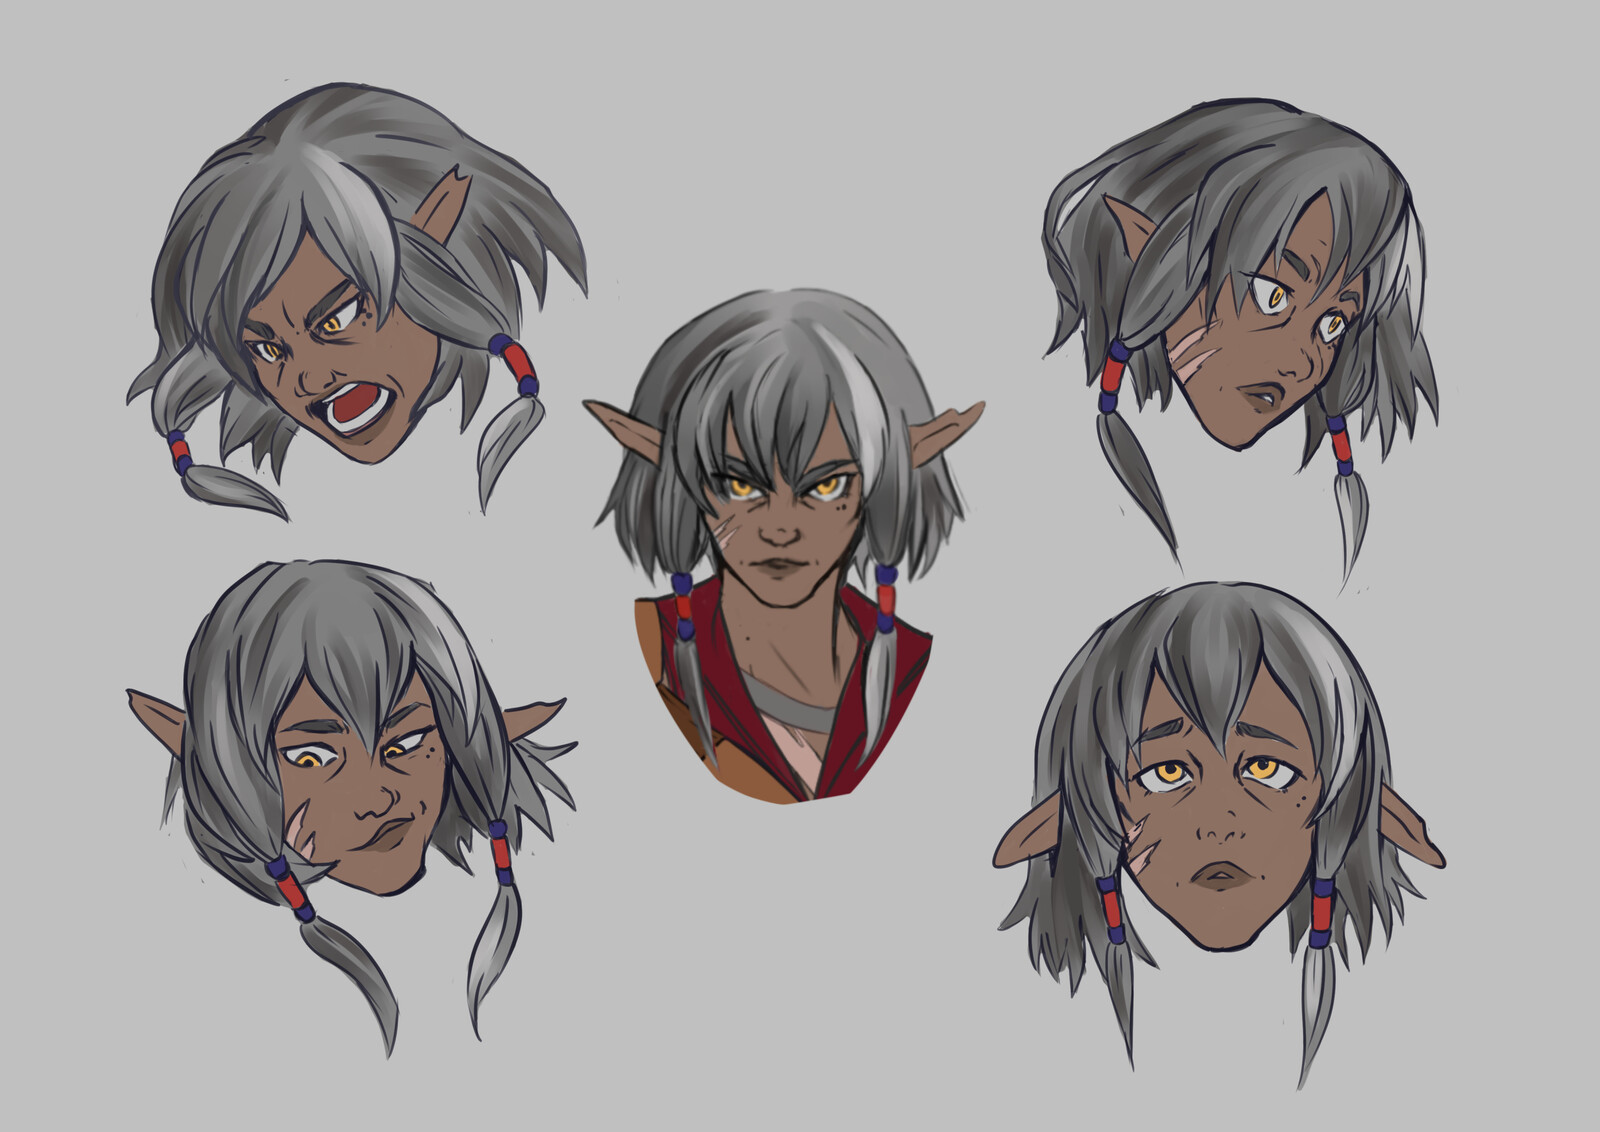 Expression study sheet for my character Rose, for an original story and a Dungeons and Dragons game.